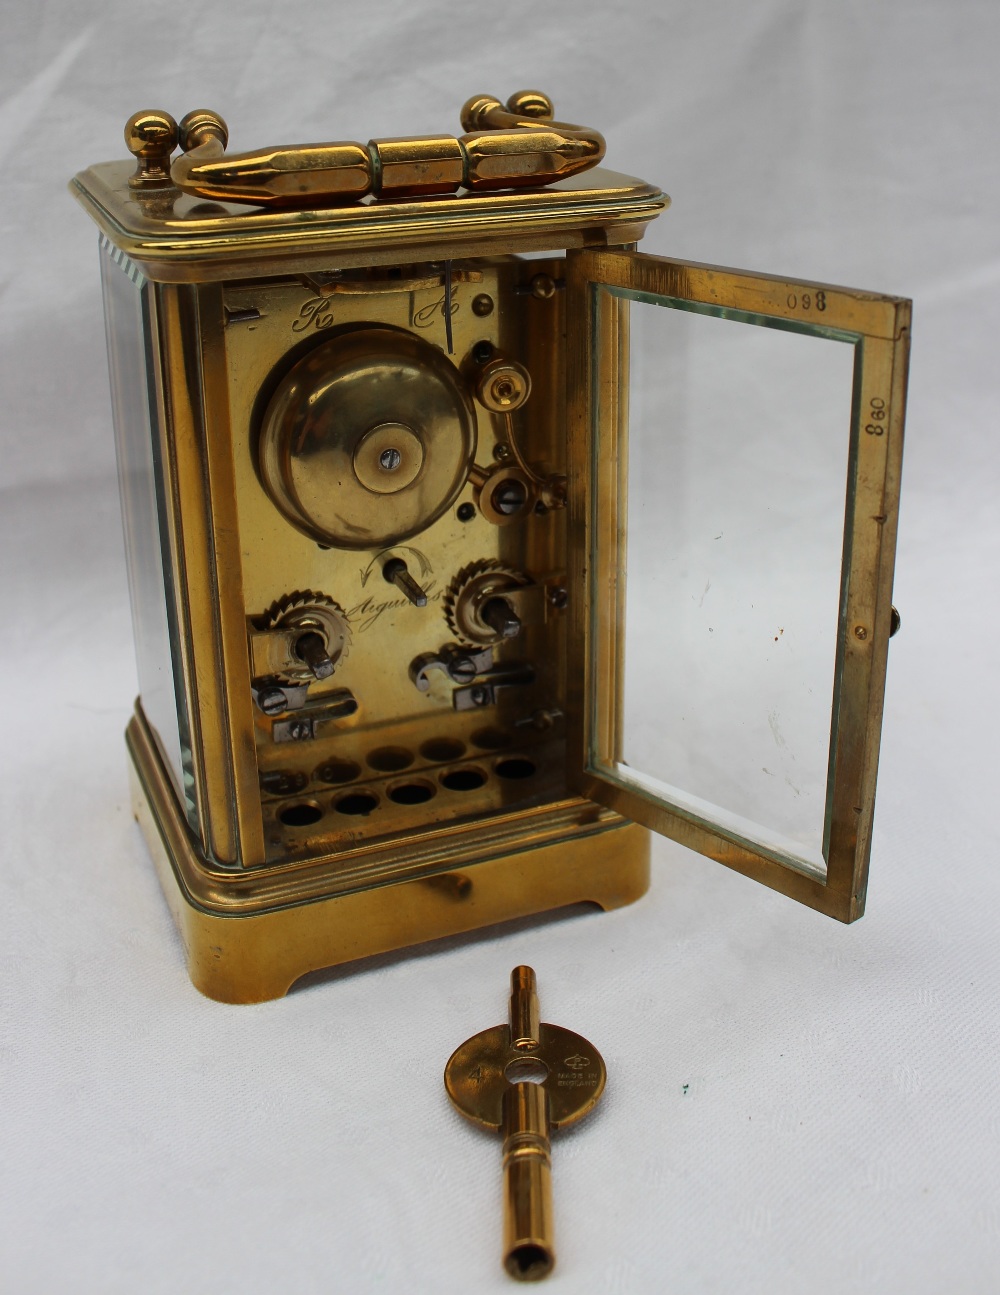 A 19th century French brass carriage clock, - Image 5 of 7